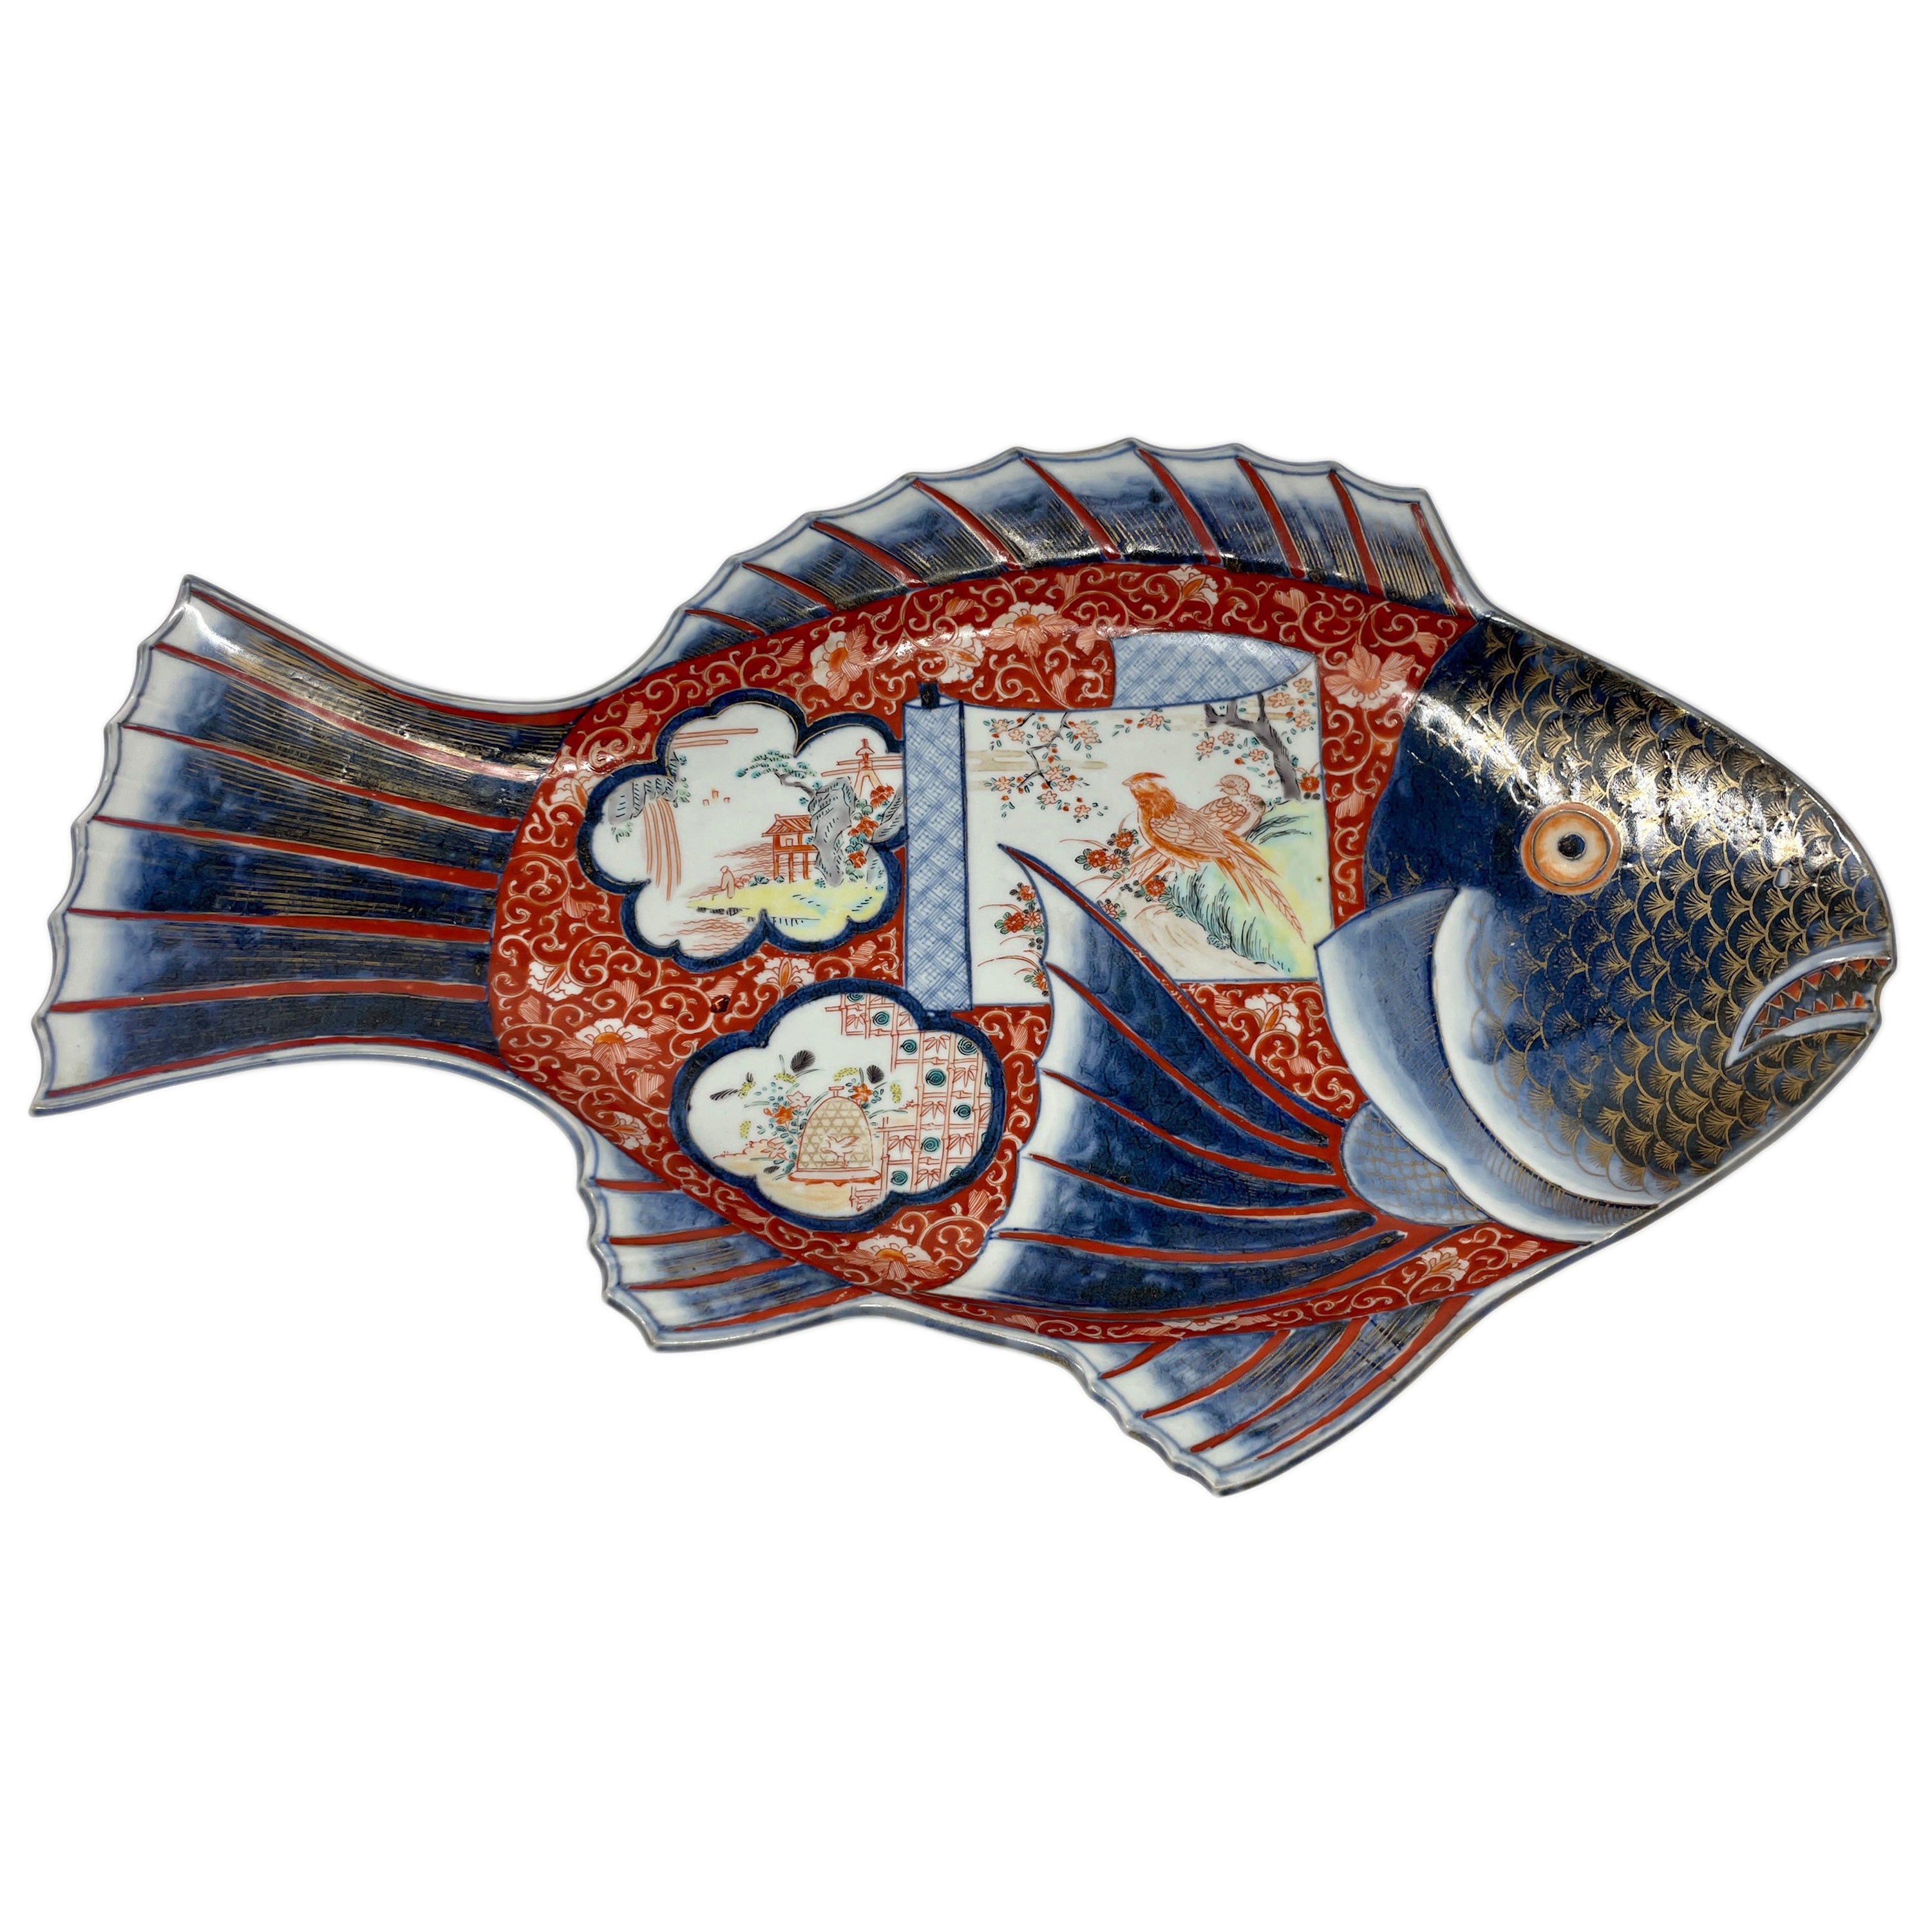 Antique Late 19th Century Japanese Porcelain Fish-Shaped Platter circa 1890-1910 For Sale